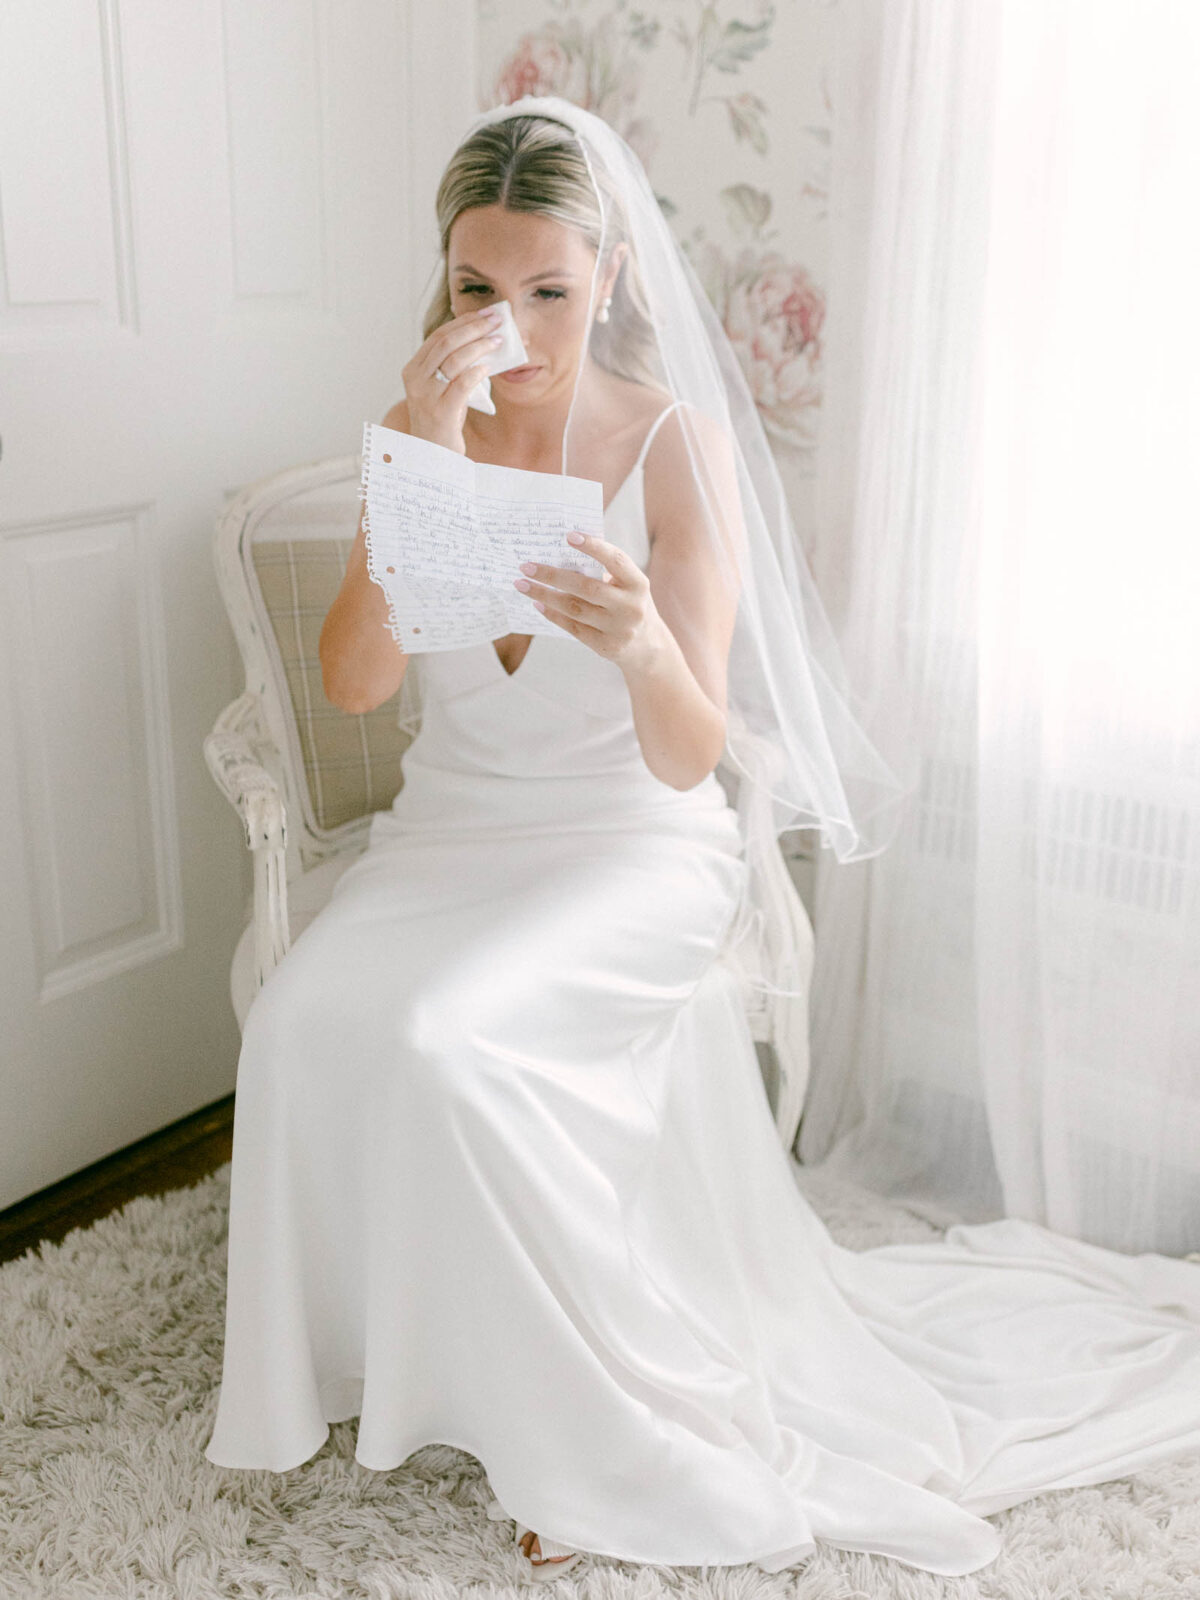 Bride reading letter from the groom
